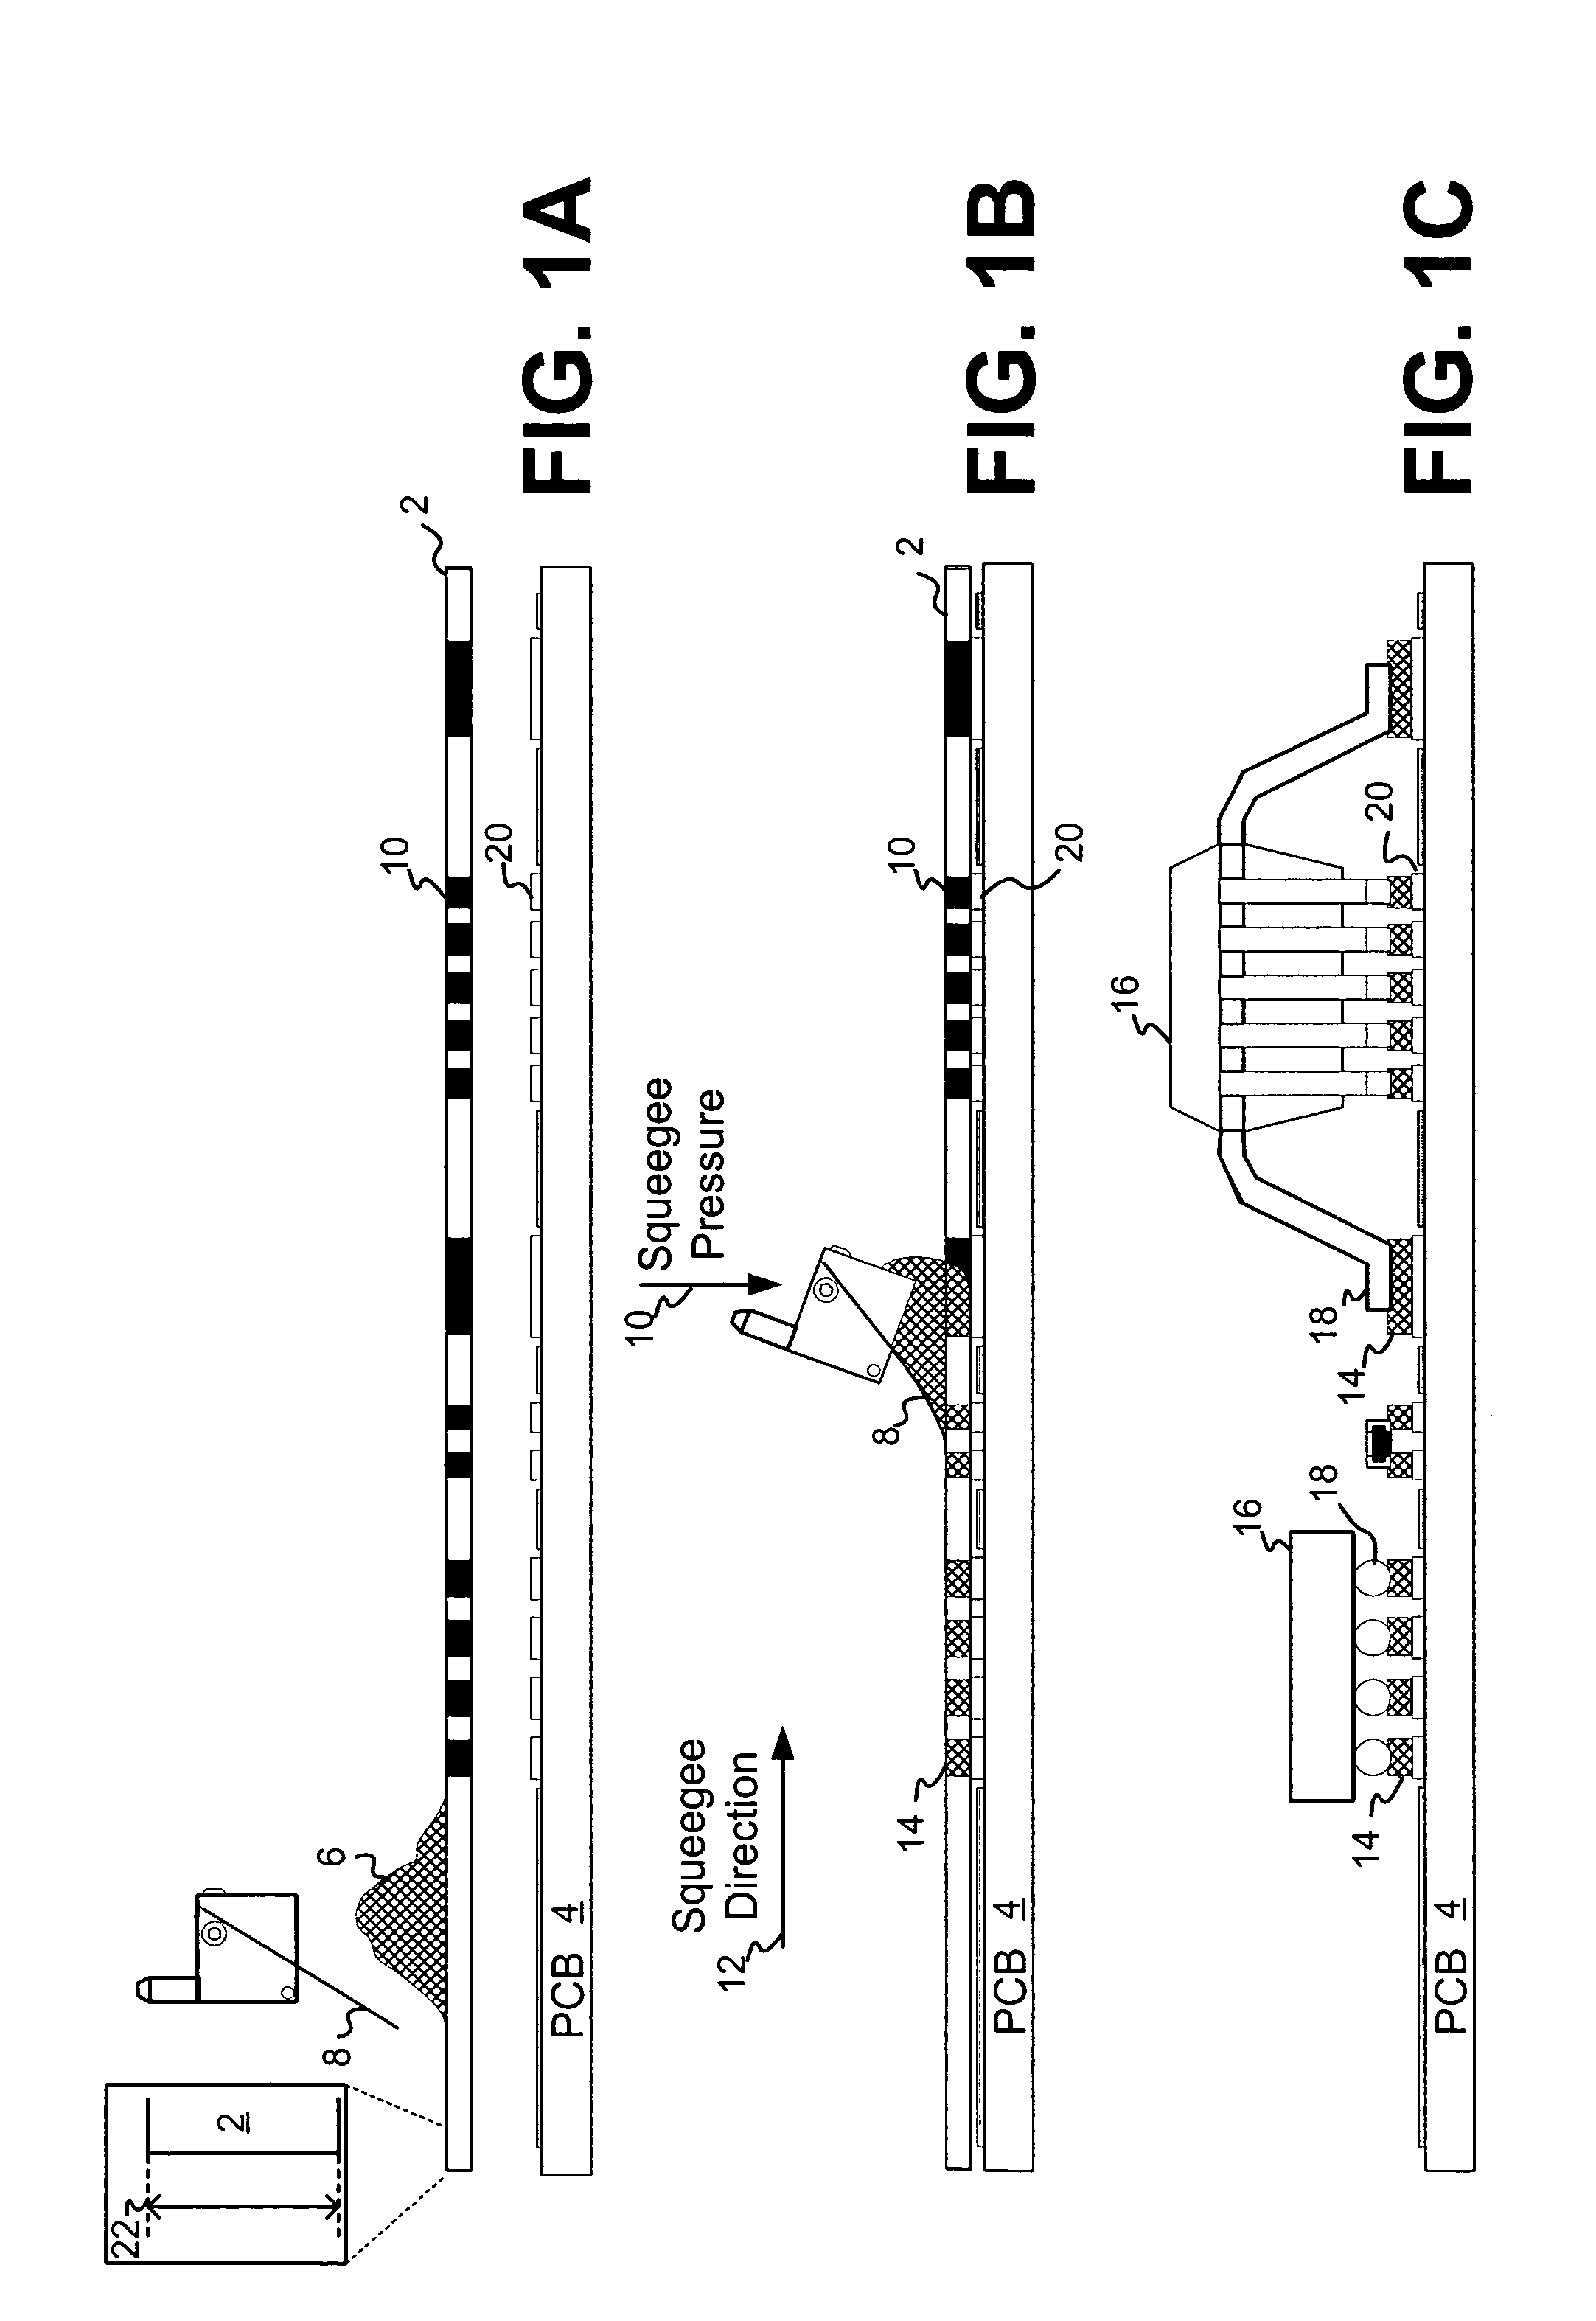 System and methods for data-driven control of manufacturing processes